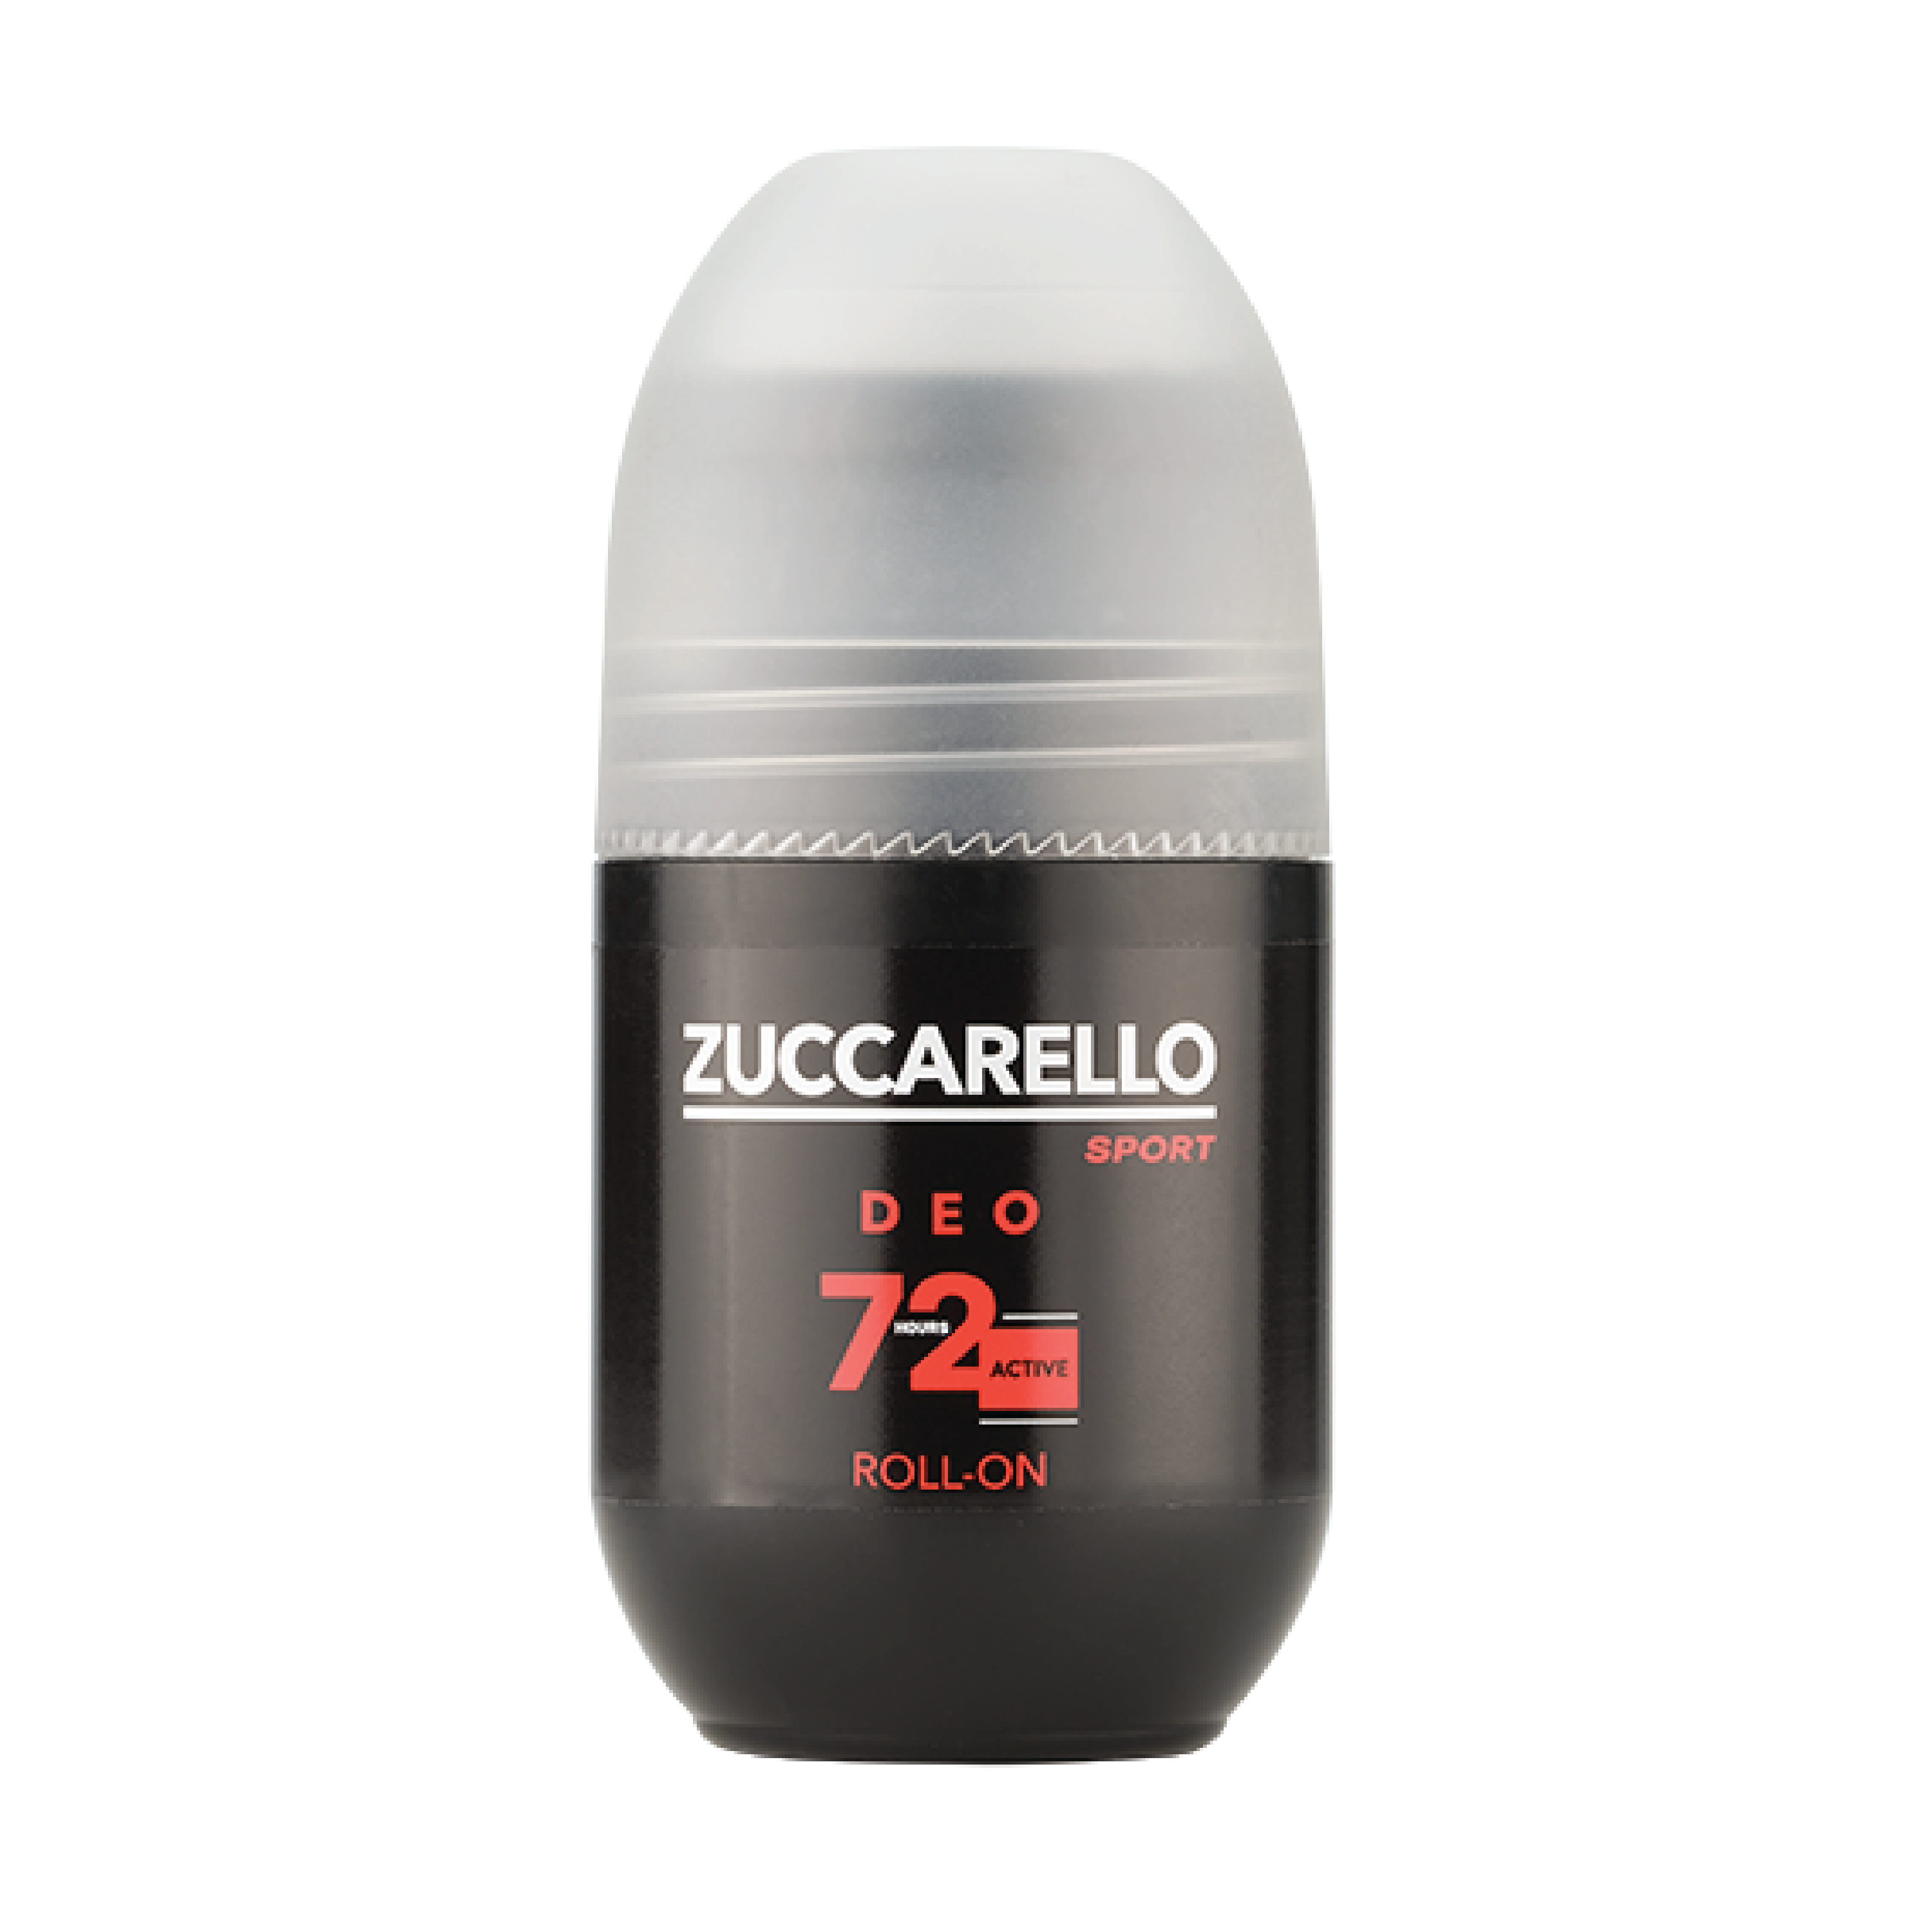 ZUCCARELLO Sport Active Deo Roll-on 72h, 50 ml